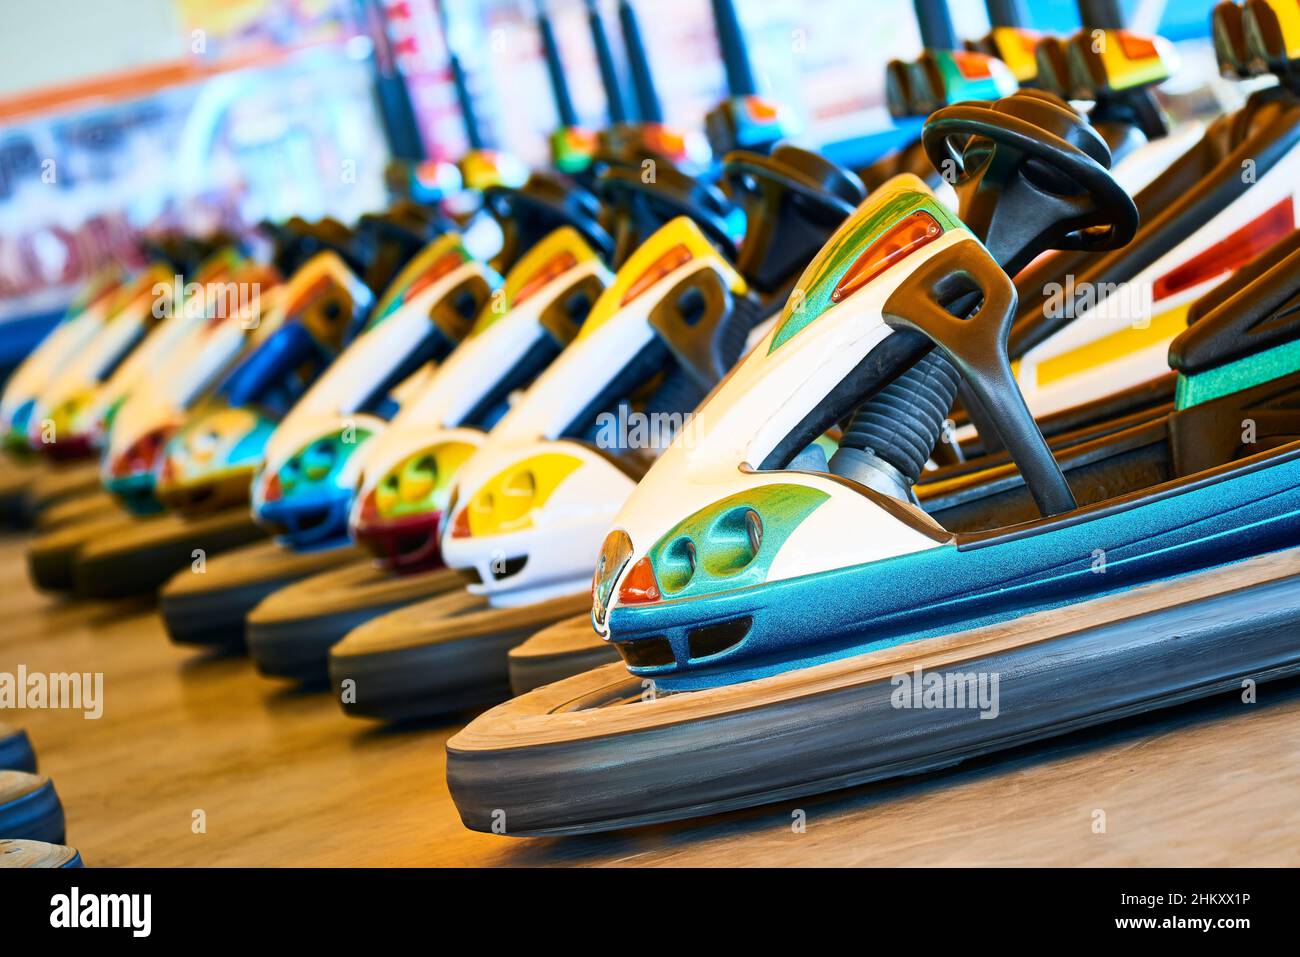 View of bumper cars at a fairground attraction Stock Photo